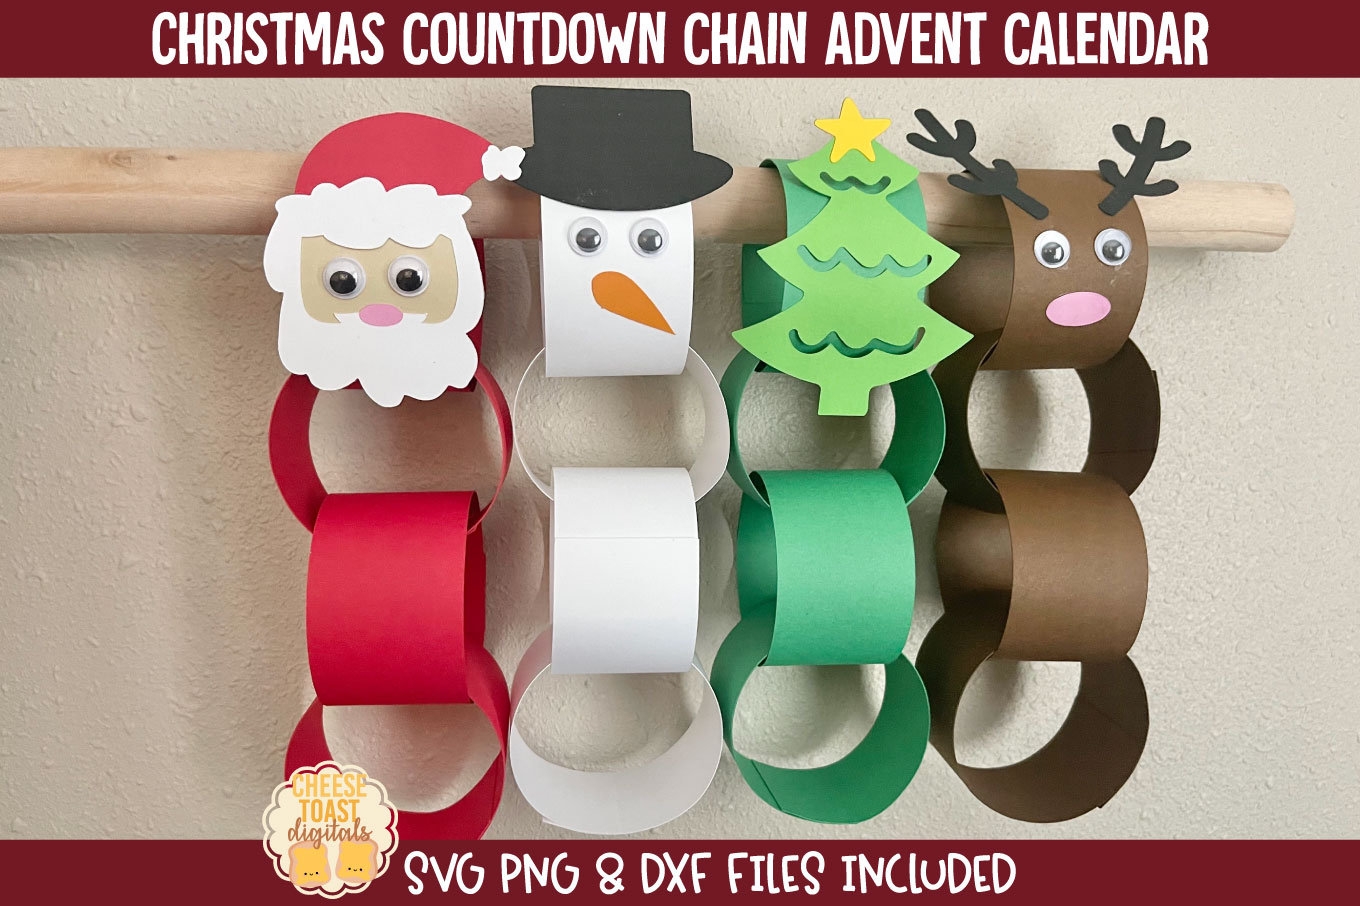 Christmas Countdown Advent Calendar SVG Paper Chain Garland Craft Kit Take And Make Kid s Paper Craft Pack Cricut Silhouette Etsy